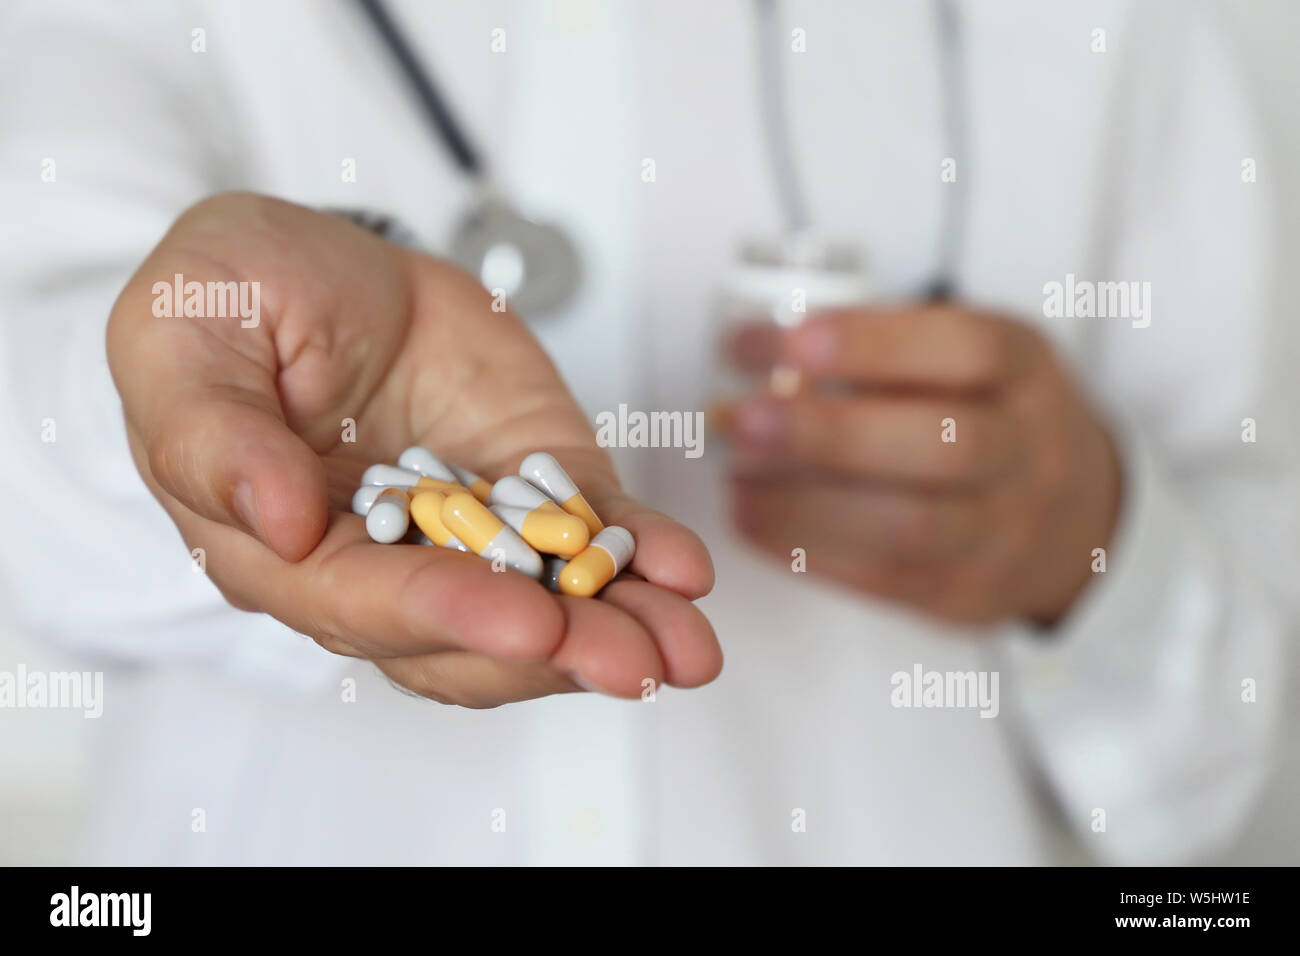 Doctor with pills, physician giving medication from bottle with capsules. Concept of dose of drugs, vitamins, medical prescription, pharmacy Stock Photo